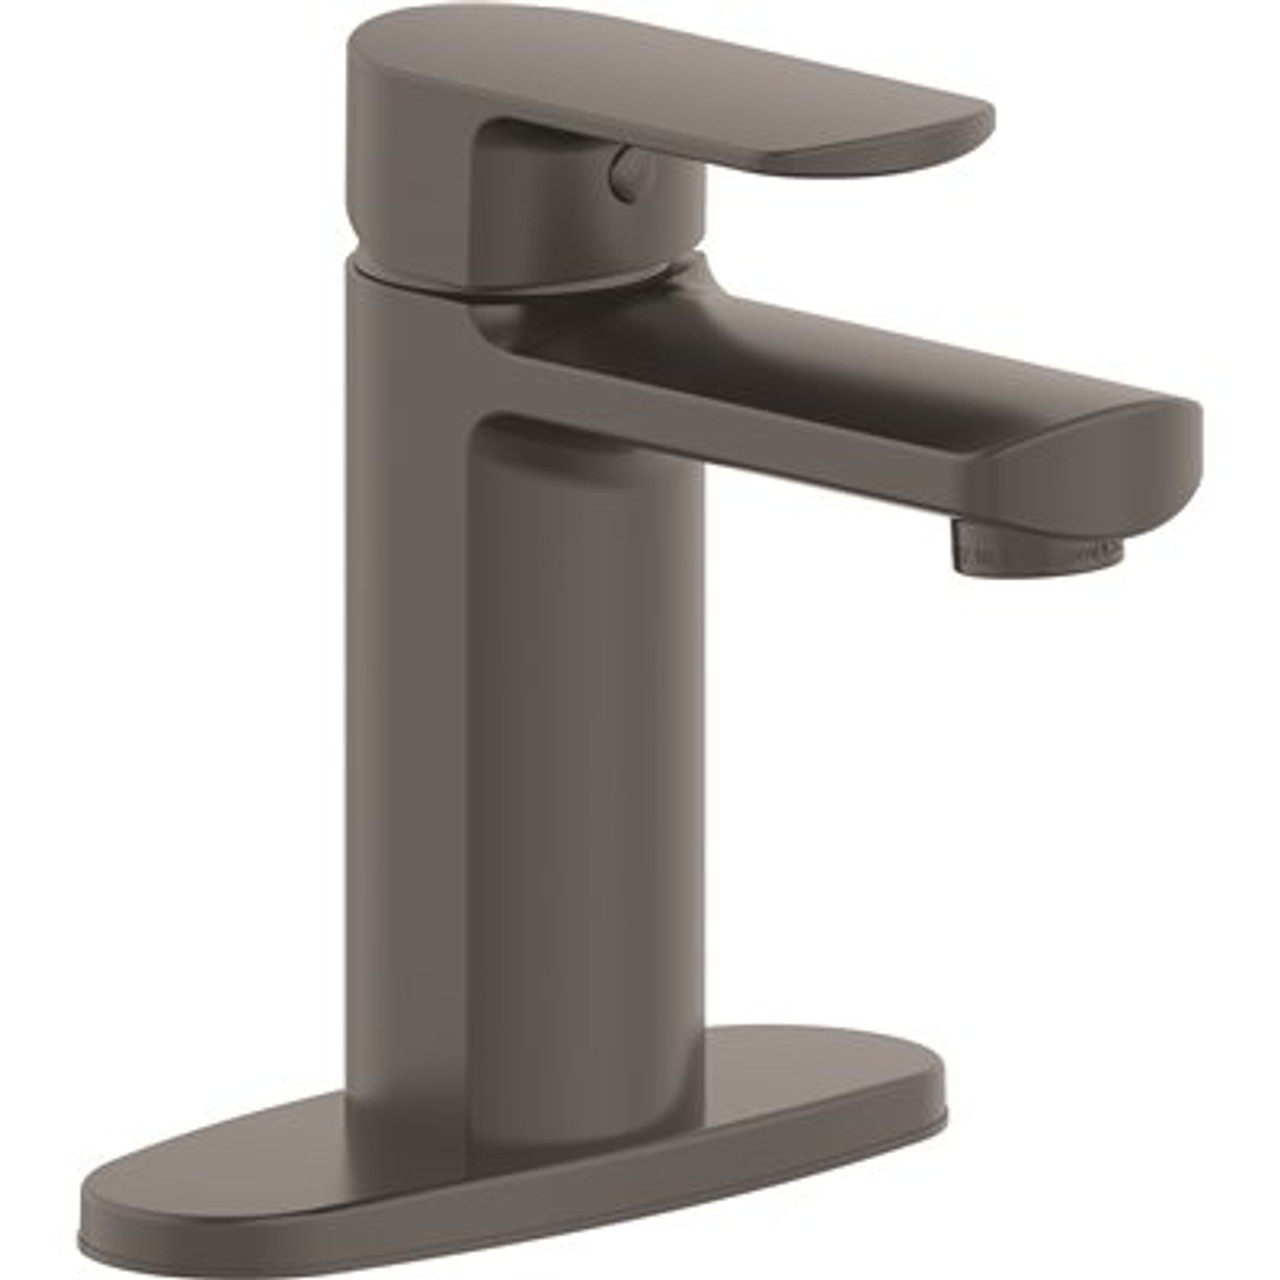 Westwind Single Hole Single-Handle Bathroom Faucet in Matte Black with Quick Install Pop-Up